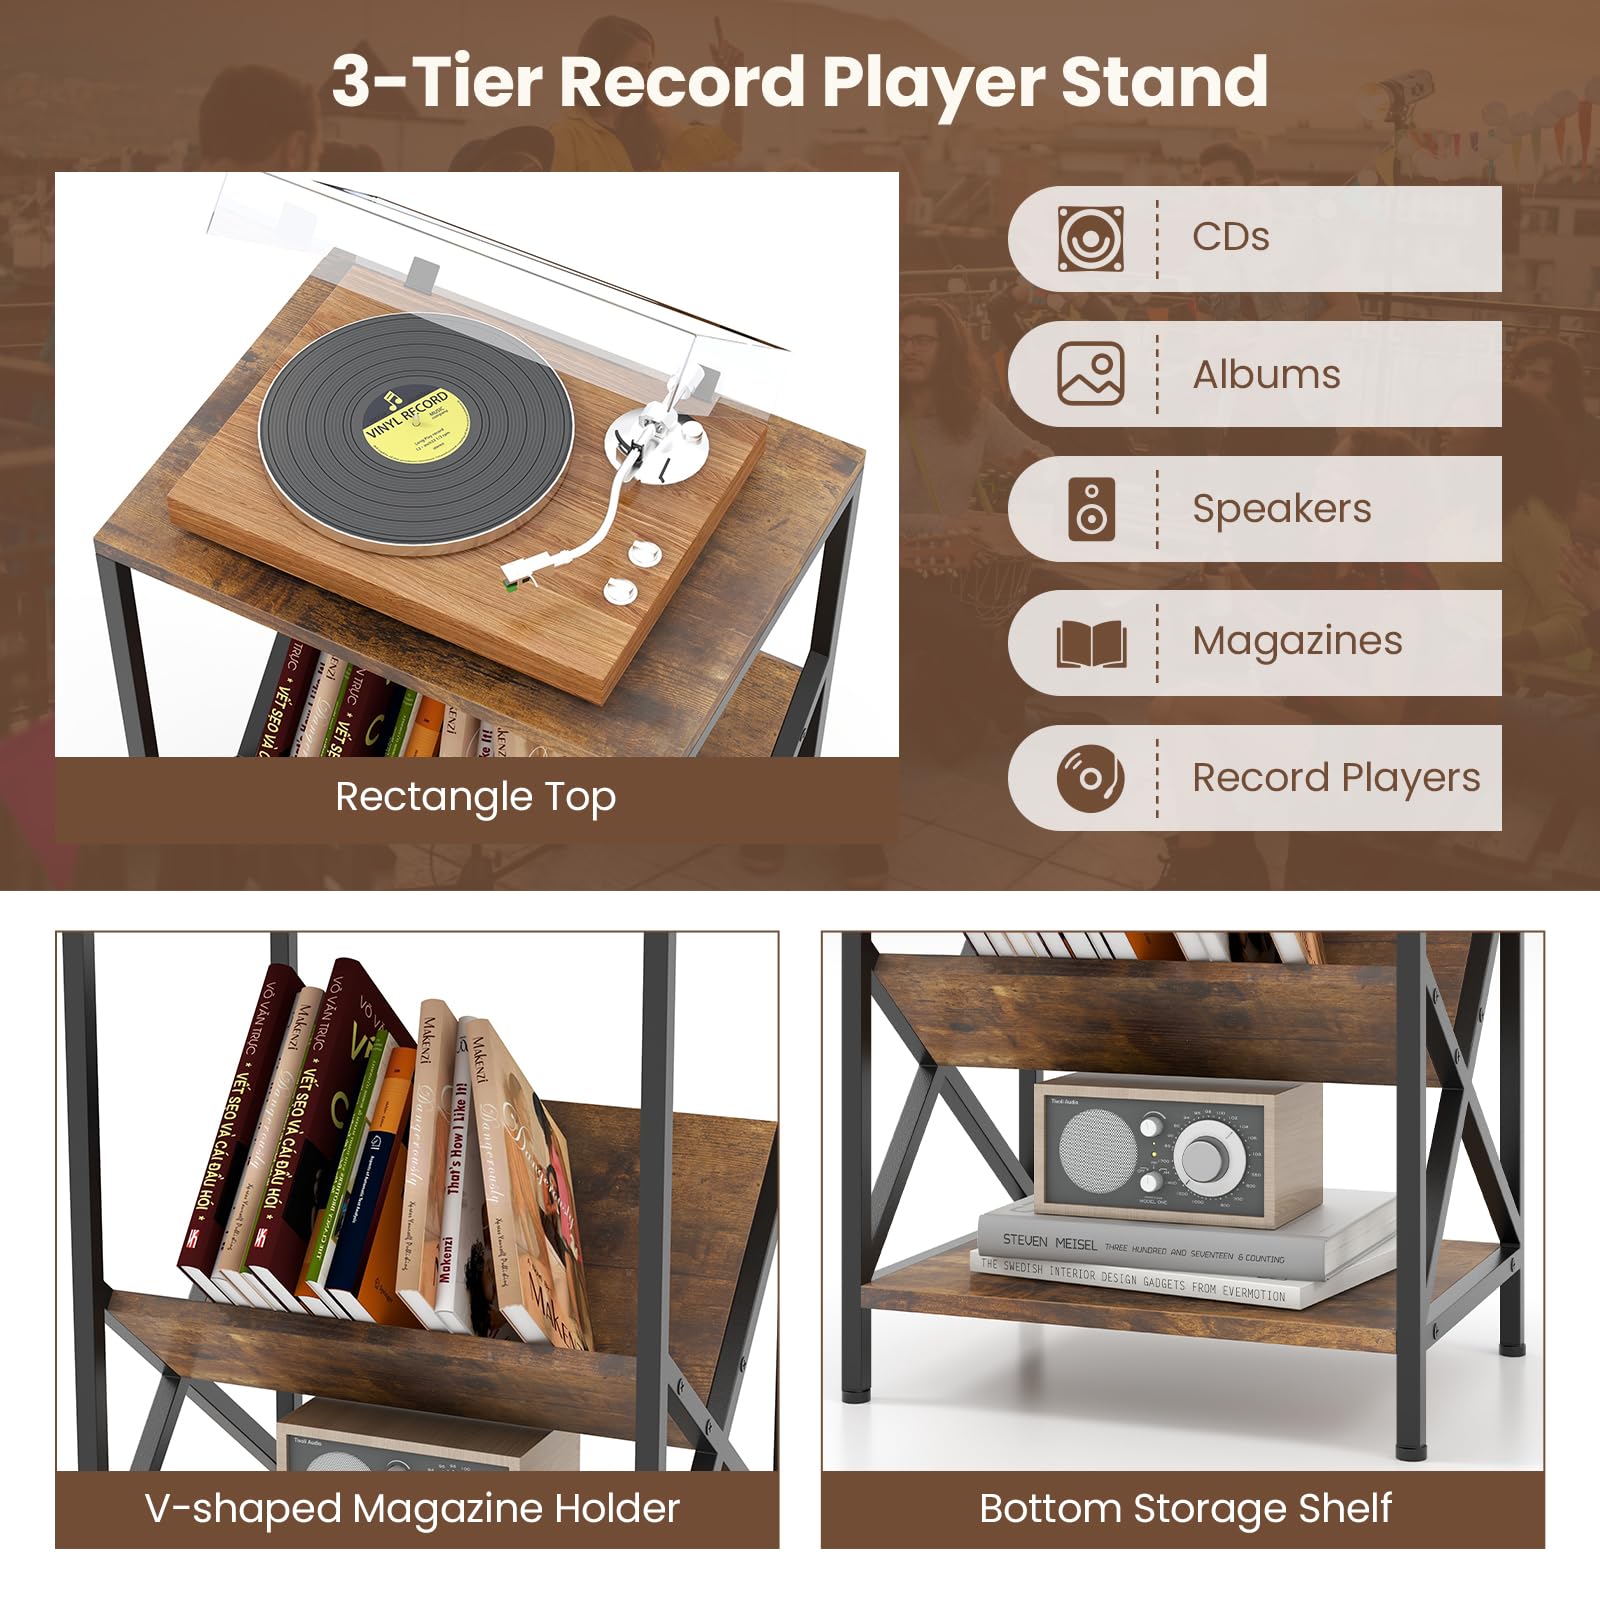 Giantex Record Player Stand, 3-Tier End Table w/ V-Shaped Magazine Holder, Turntable Stand with Record Storage Up to 80 Albums